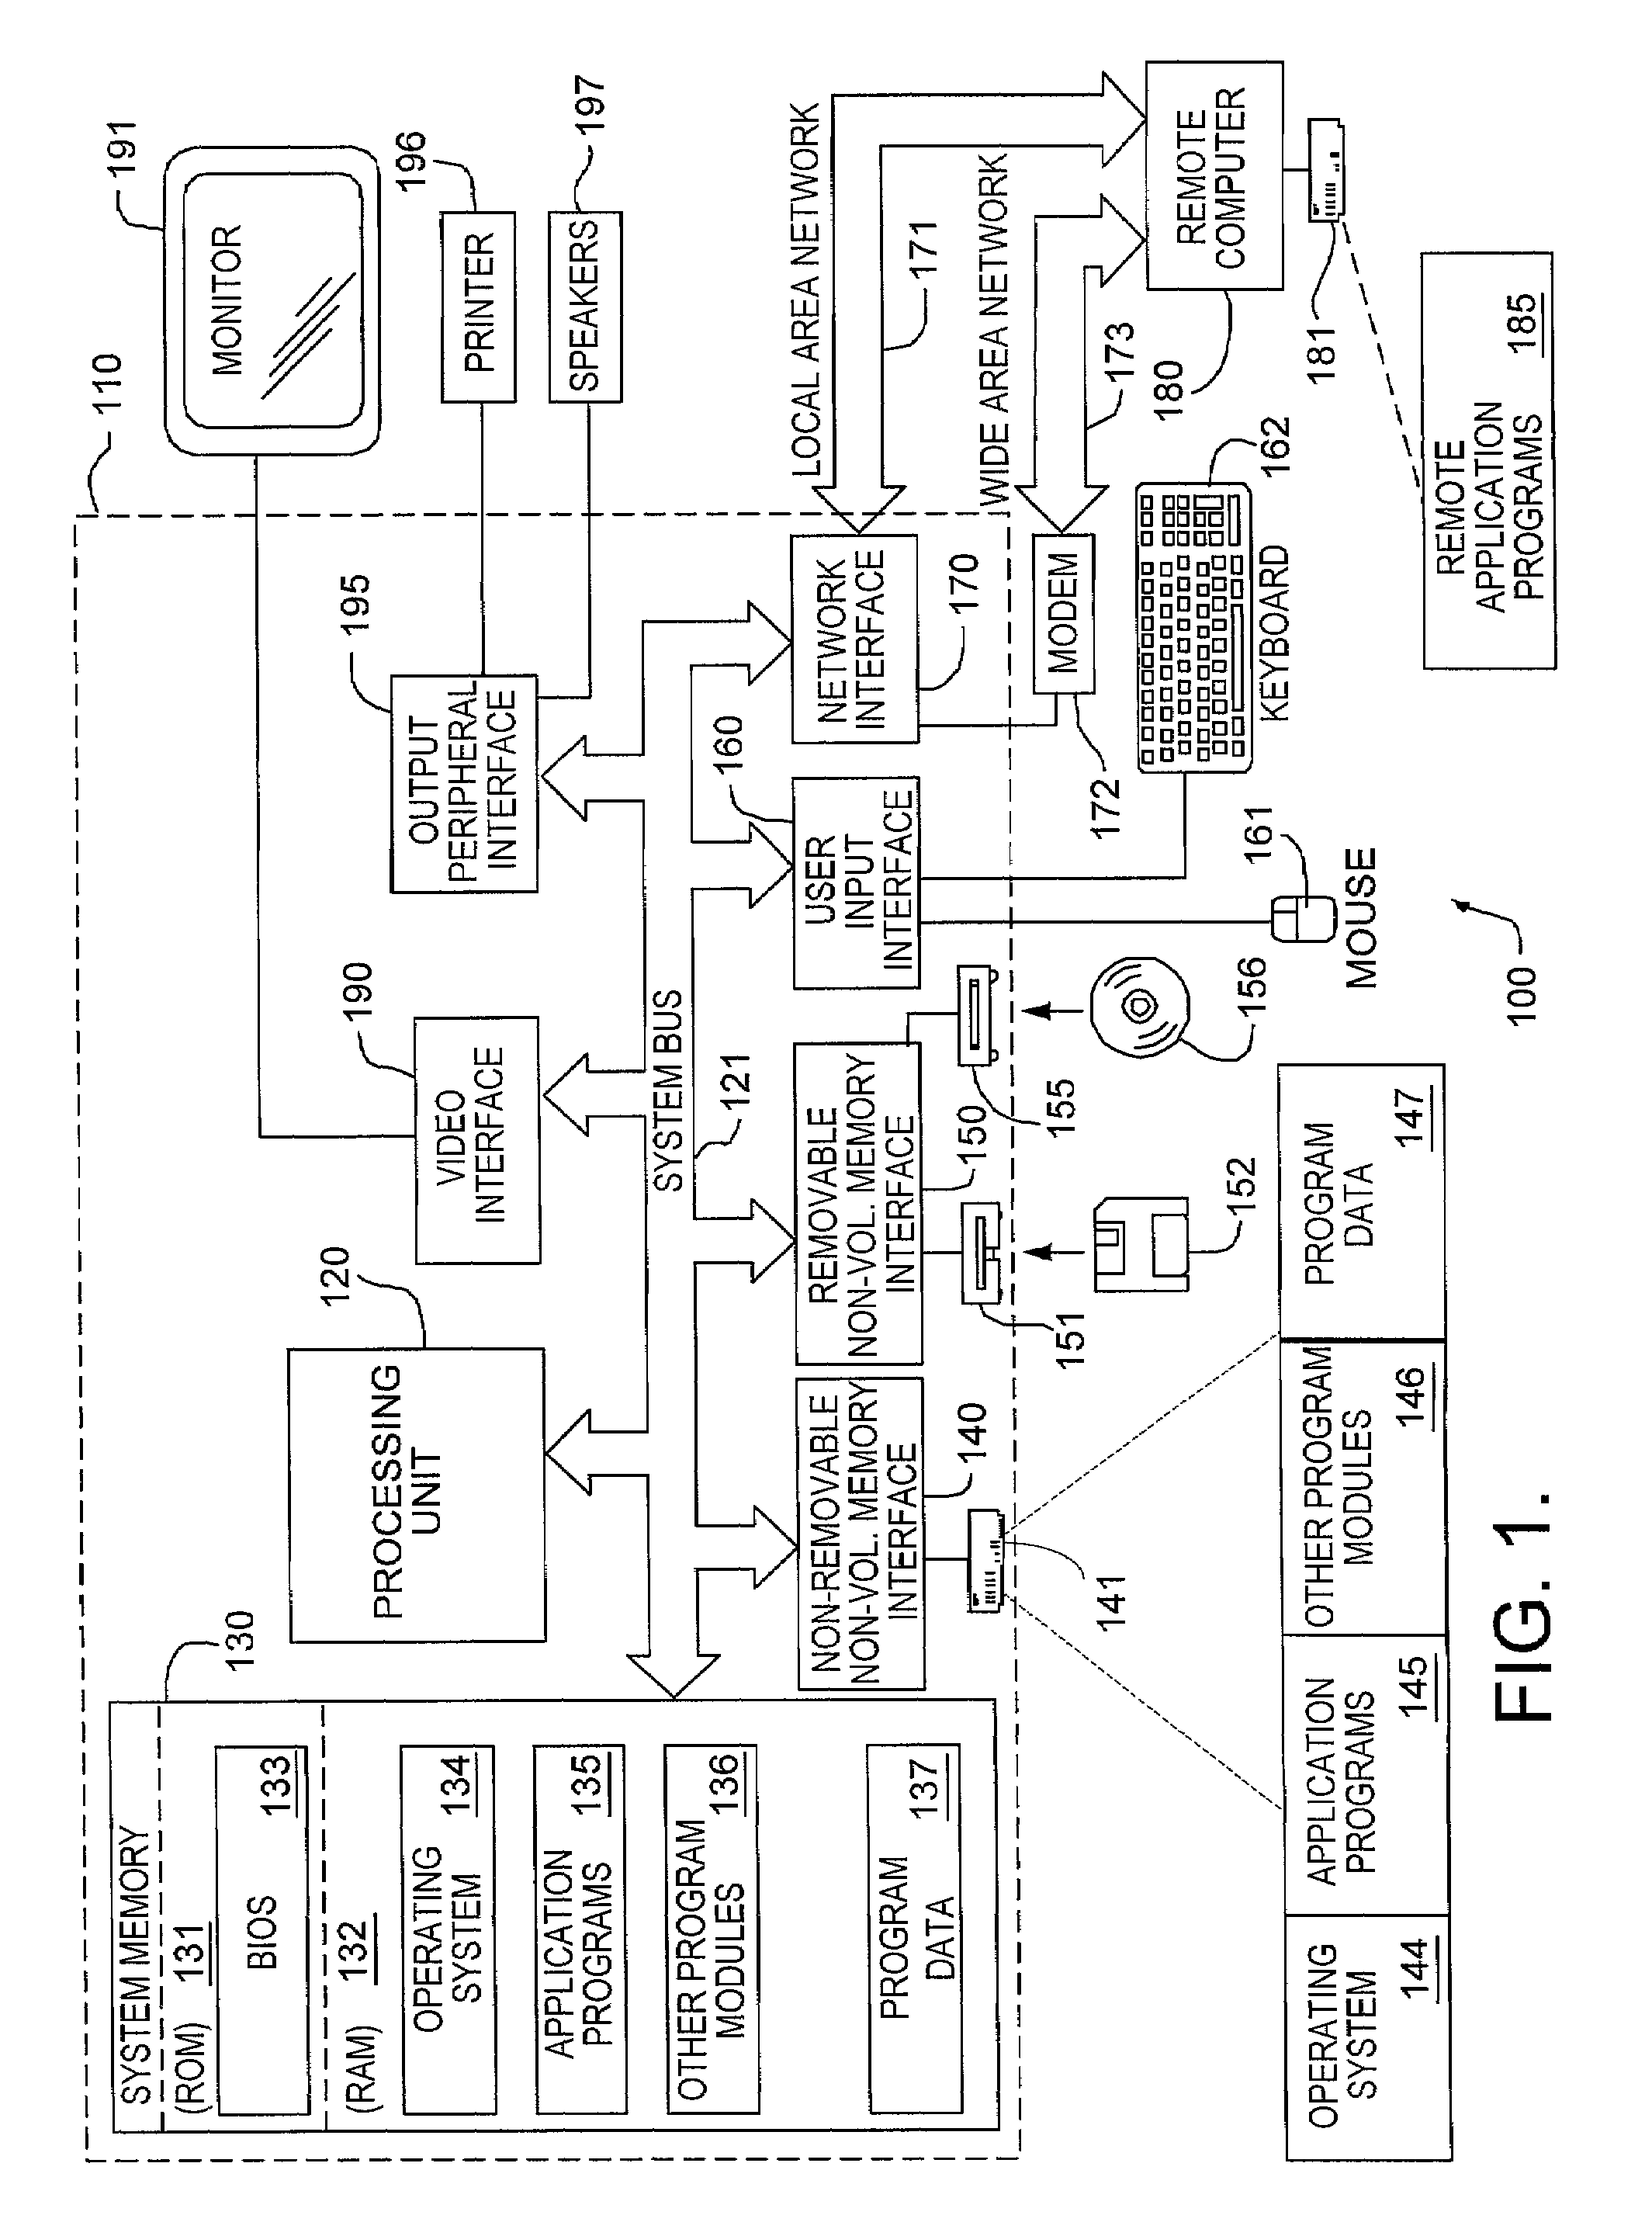 Method and system for switching between multiple computer applications